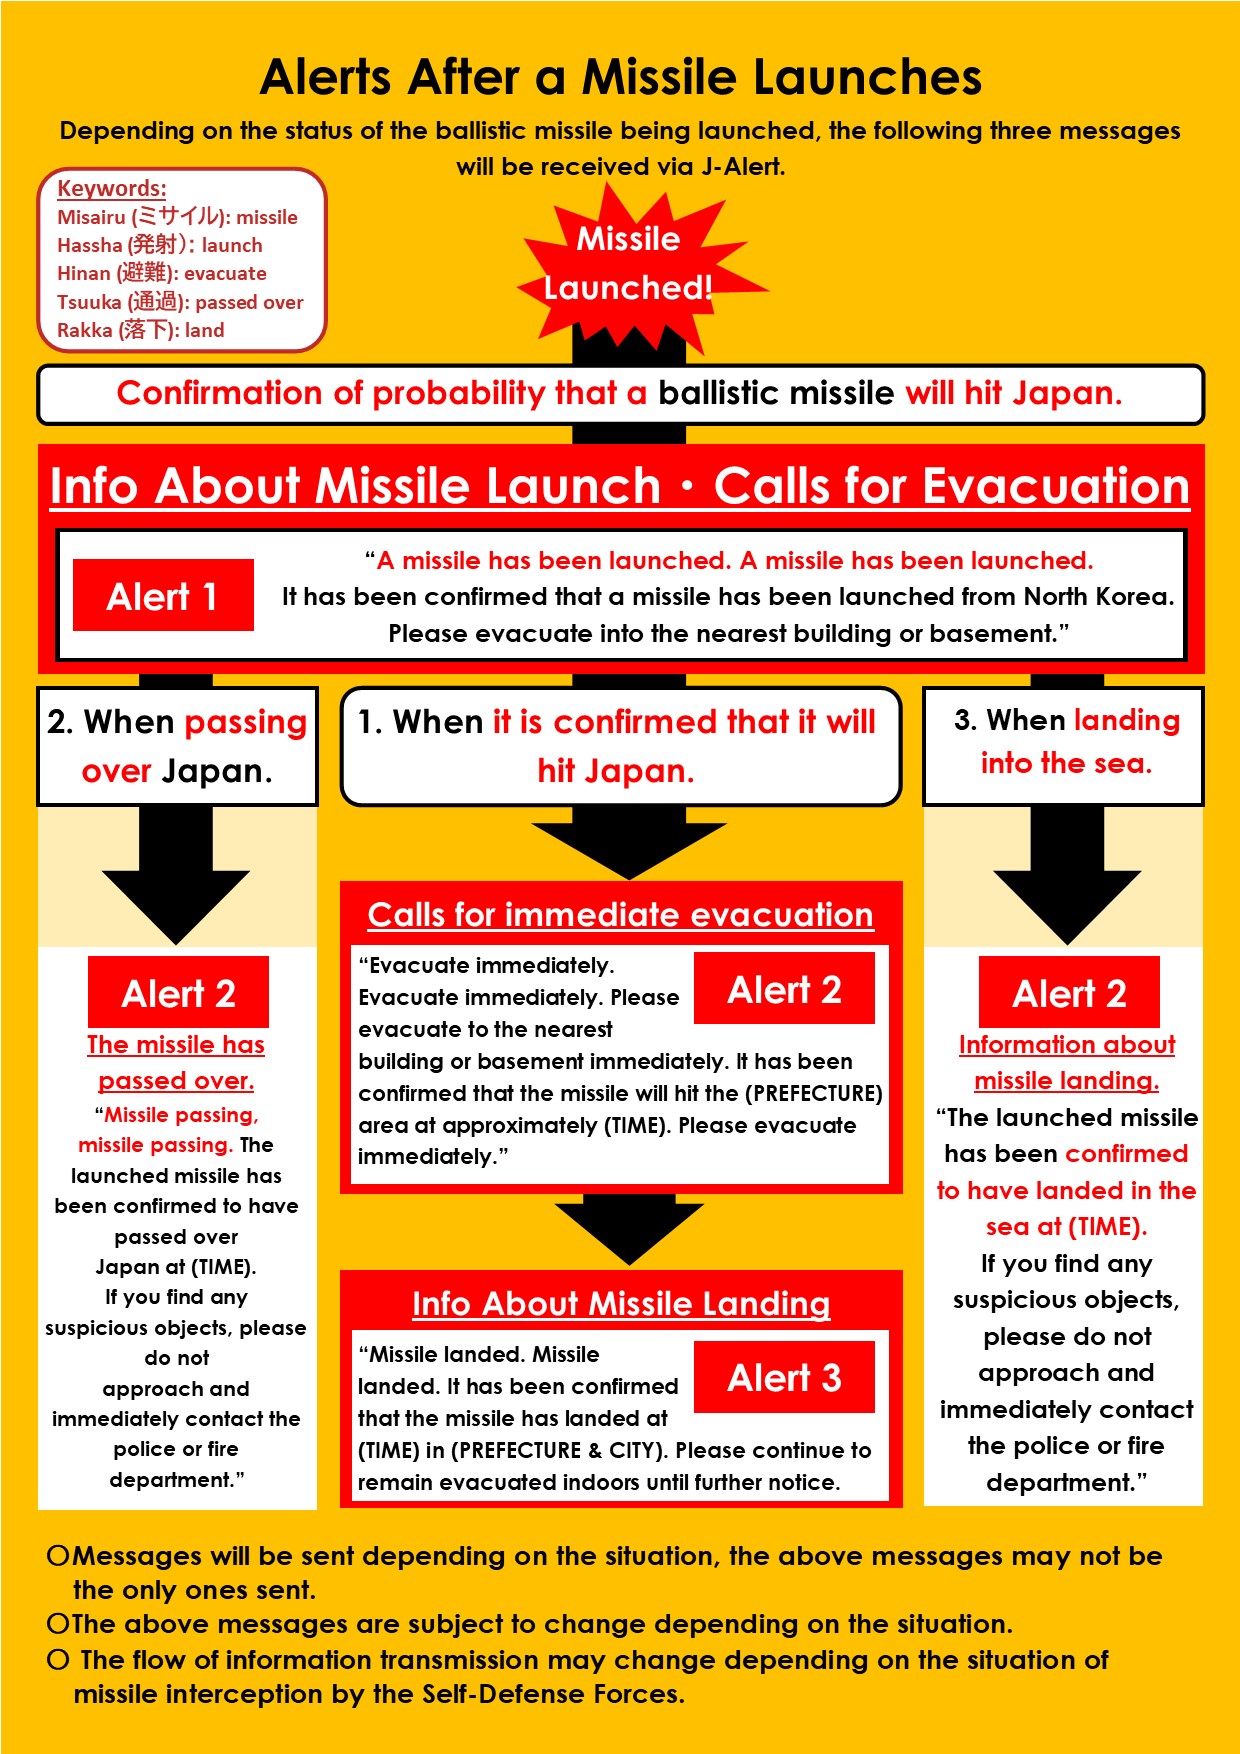 Alerts After a Missile Launches